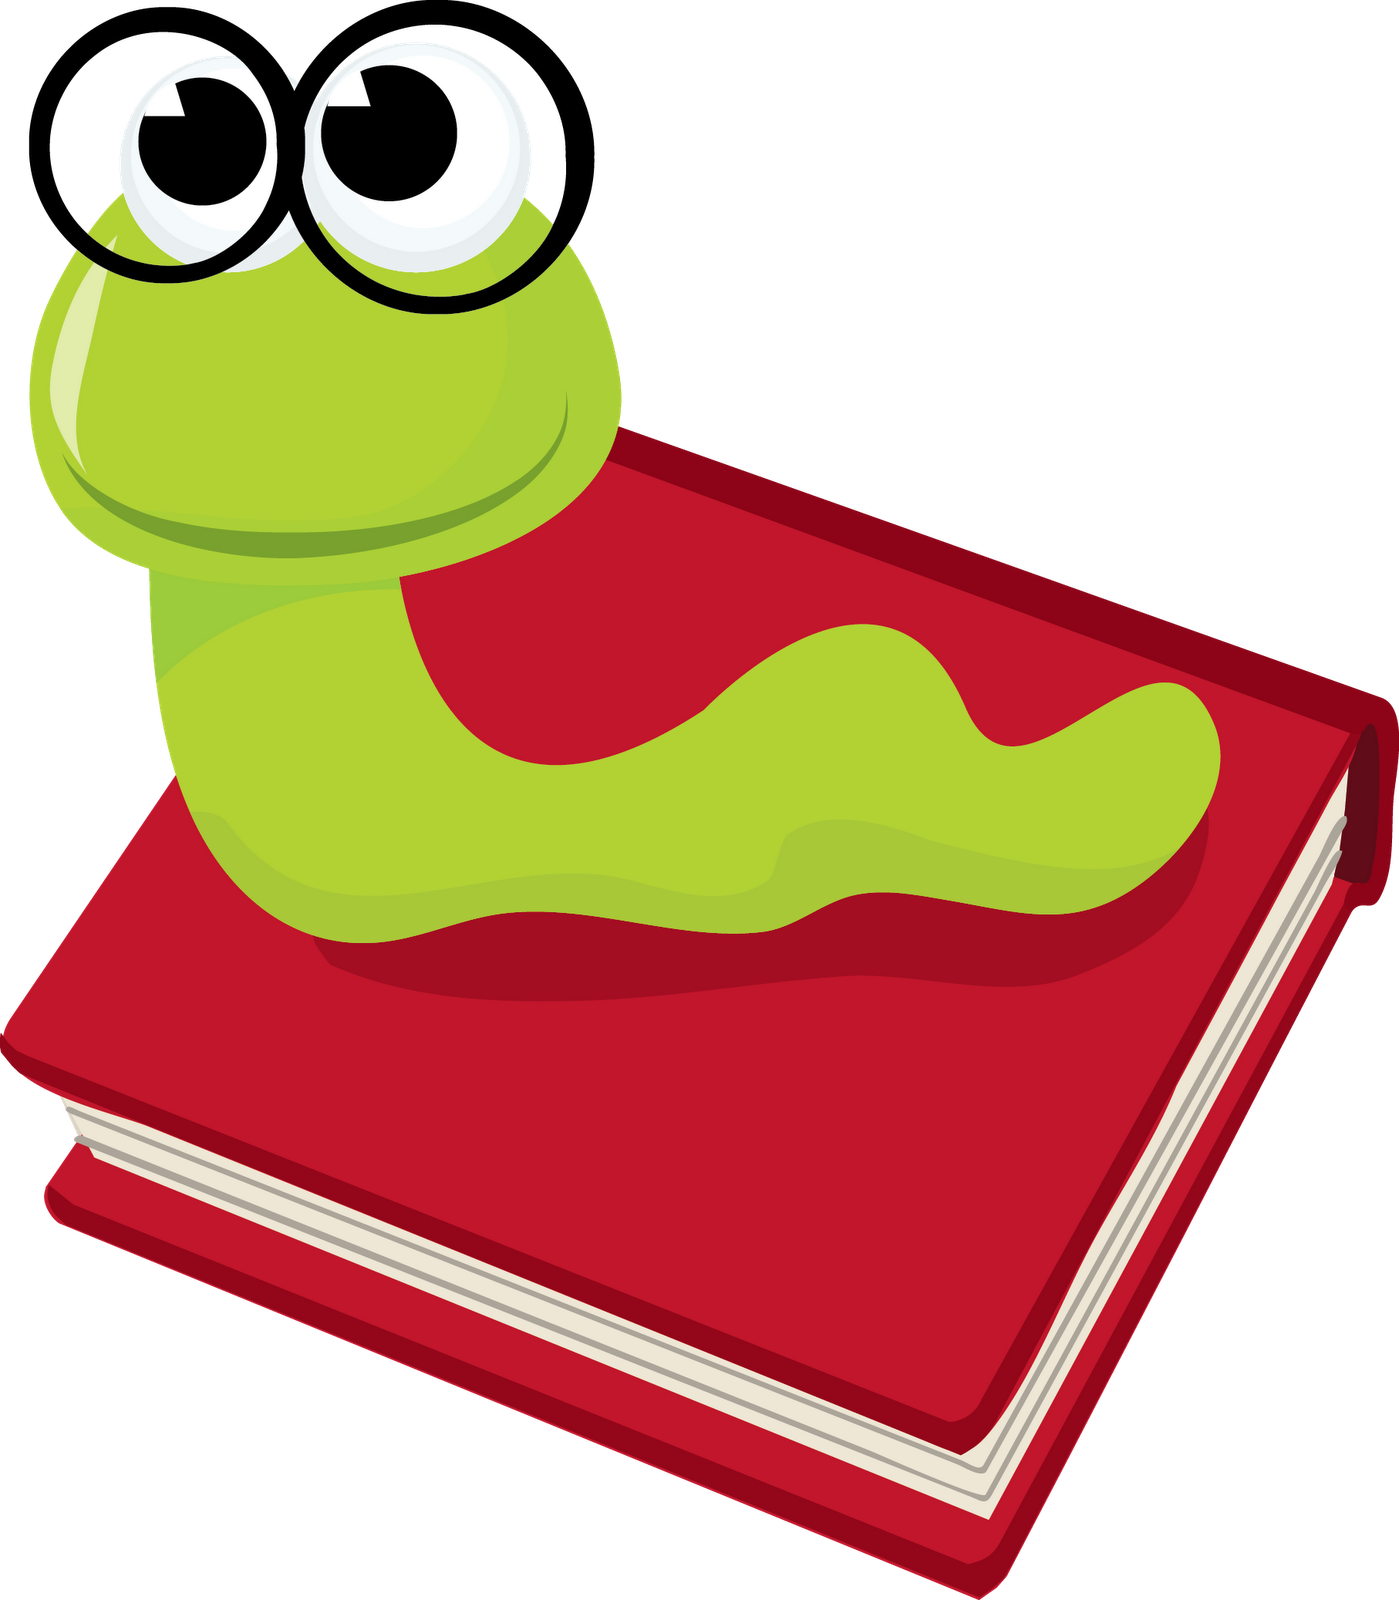 Book collection on etsy. Worm clipart long worm